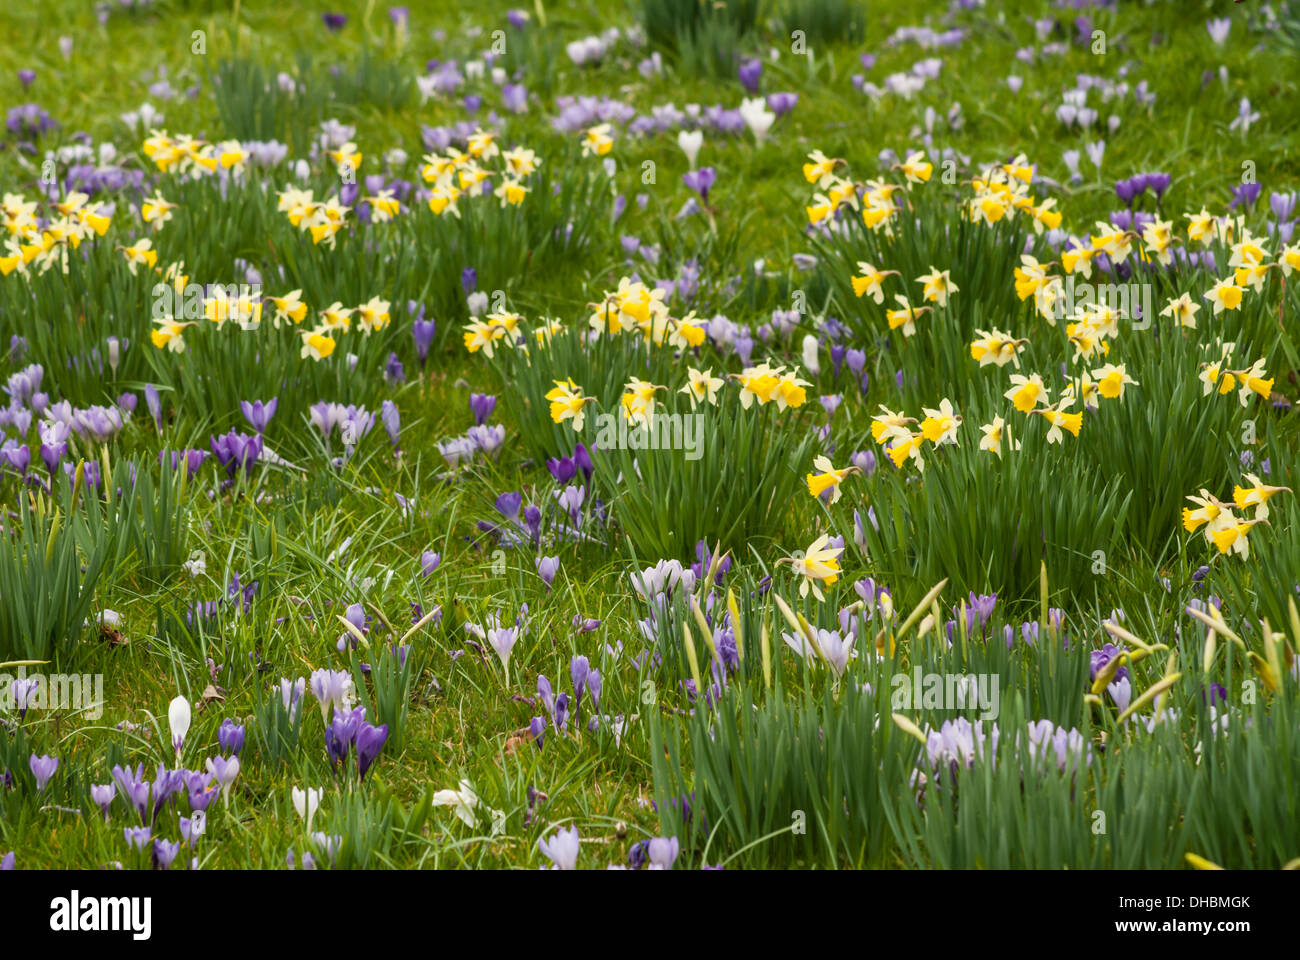 Daffodil, Narcissus pseudonarcissus. Yellow daffodils growing together with purple and white Crocus. Stock Photo